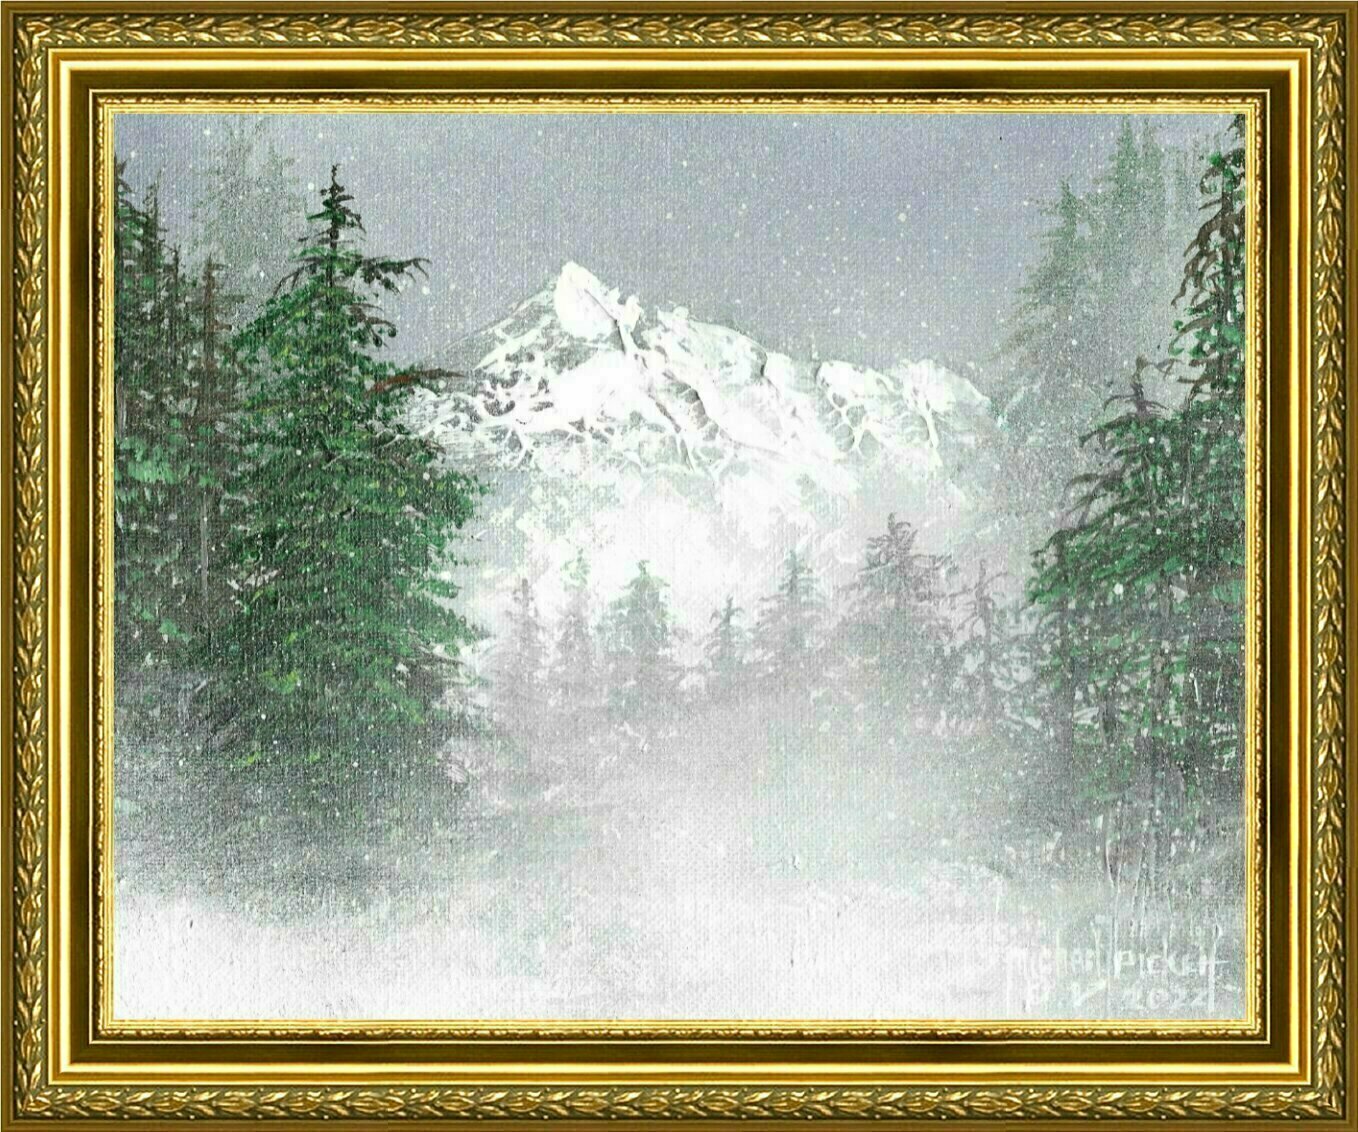 Michael Pickett; Mountain And Trees, 2022, Original Painting Acrylic, 8 x 10 inches. Artwork description: 241 Steak knife used as a pallet knife, Brush and spray paint. ...